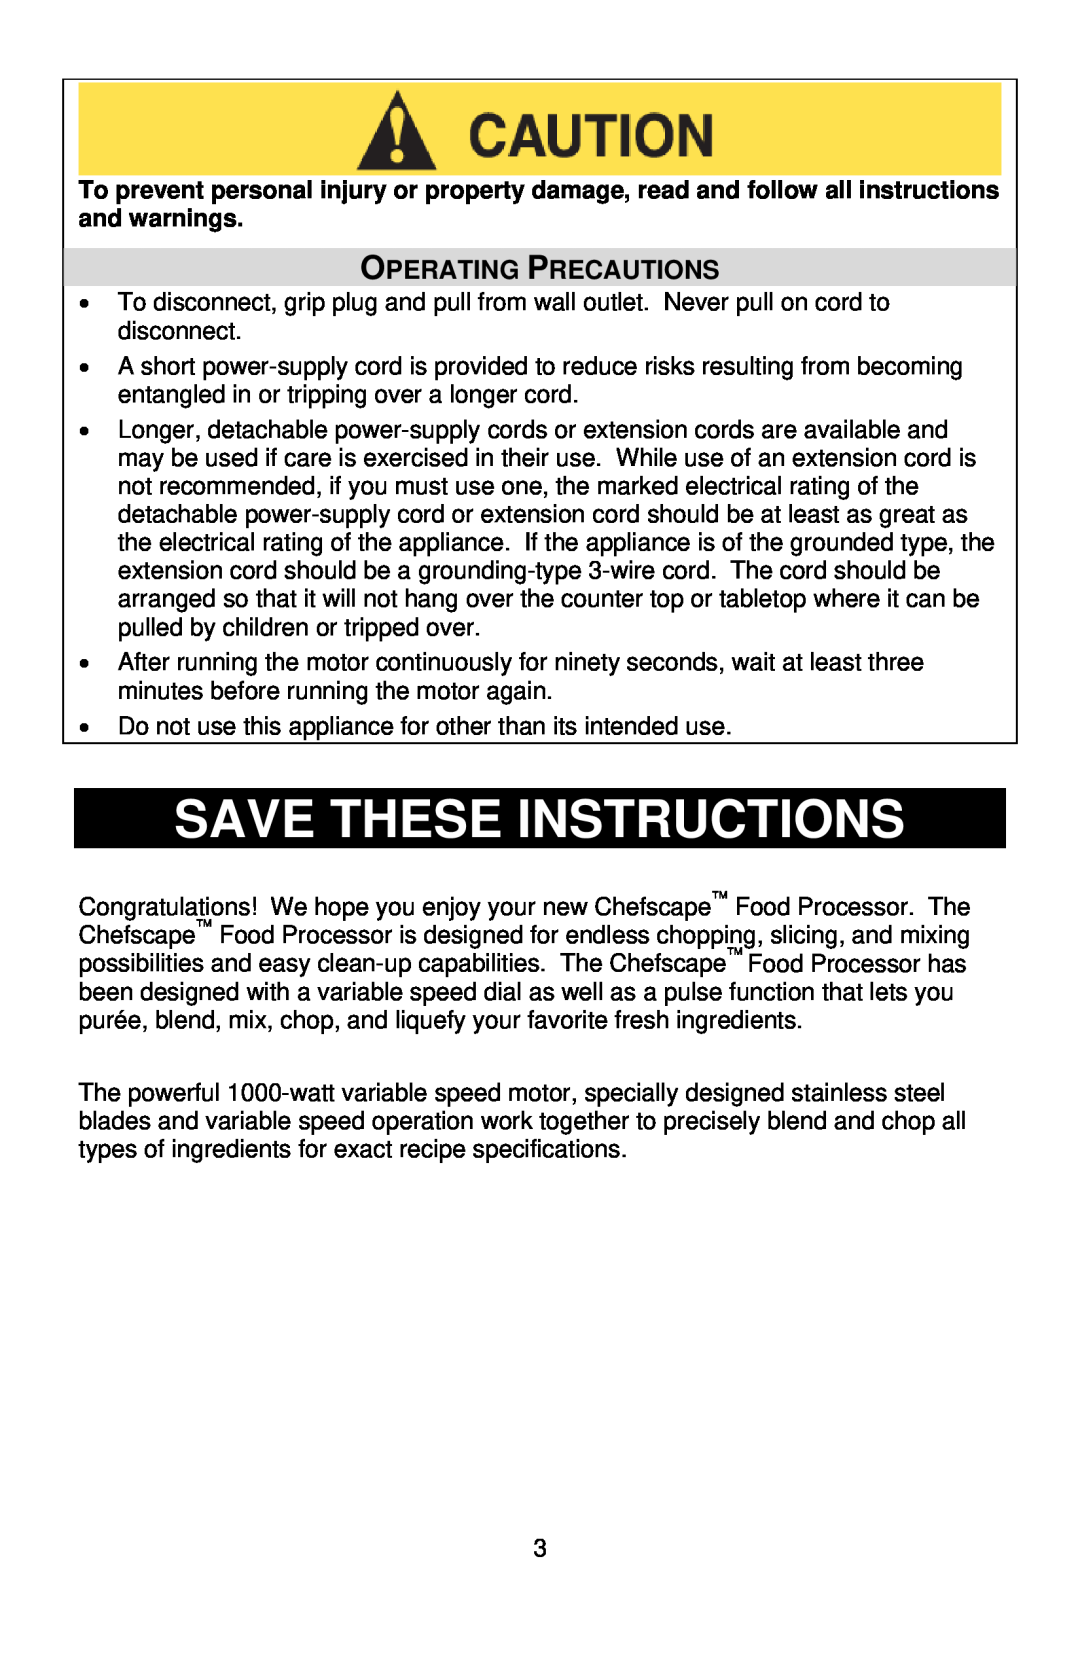 West Bend PRFP1000, L5747 instruction manual Save These Instructions, Operating Precautions 